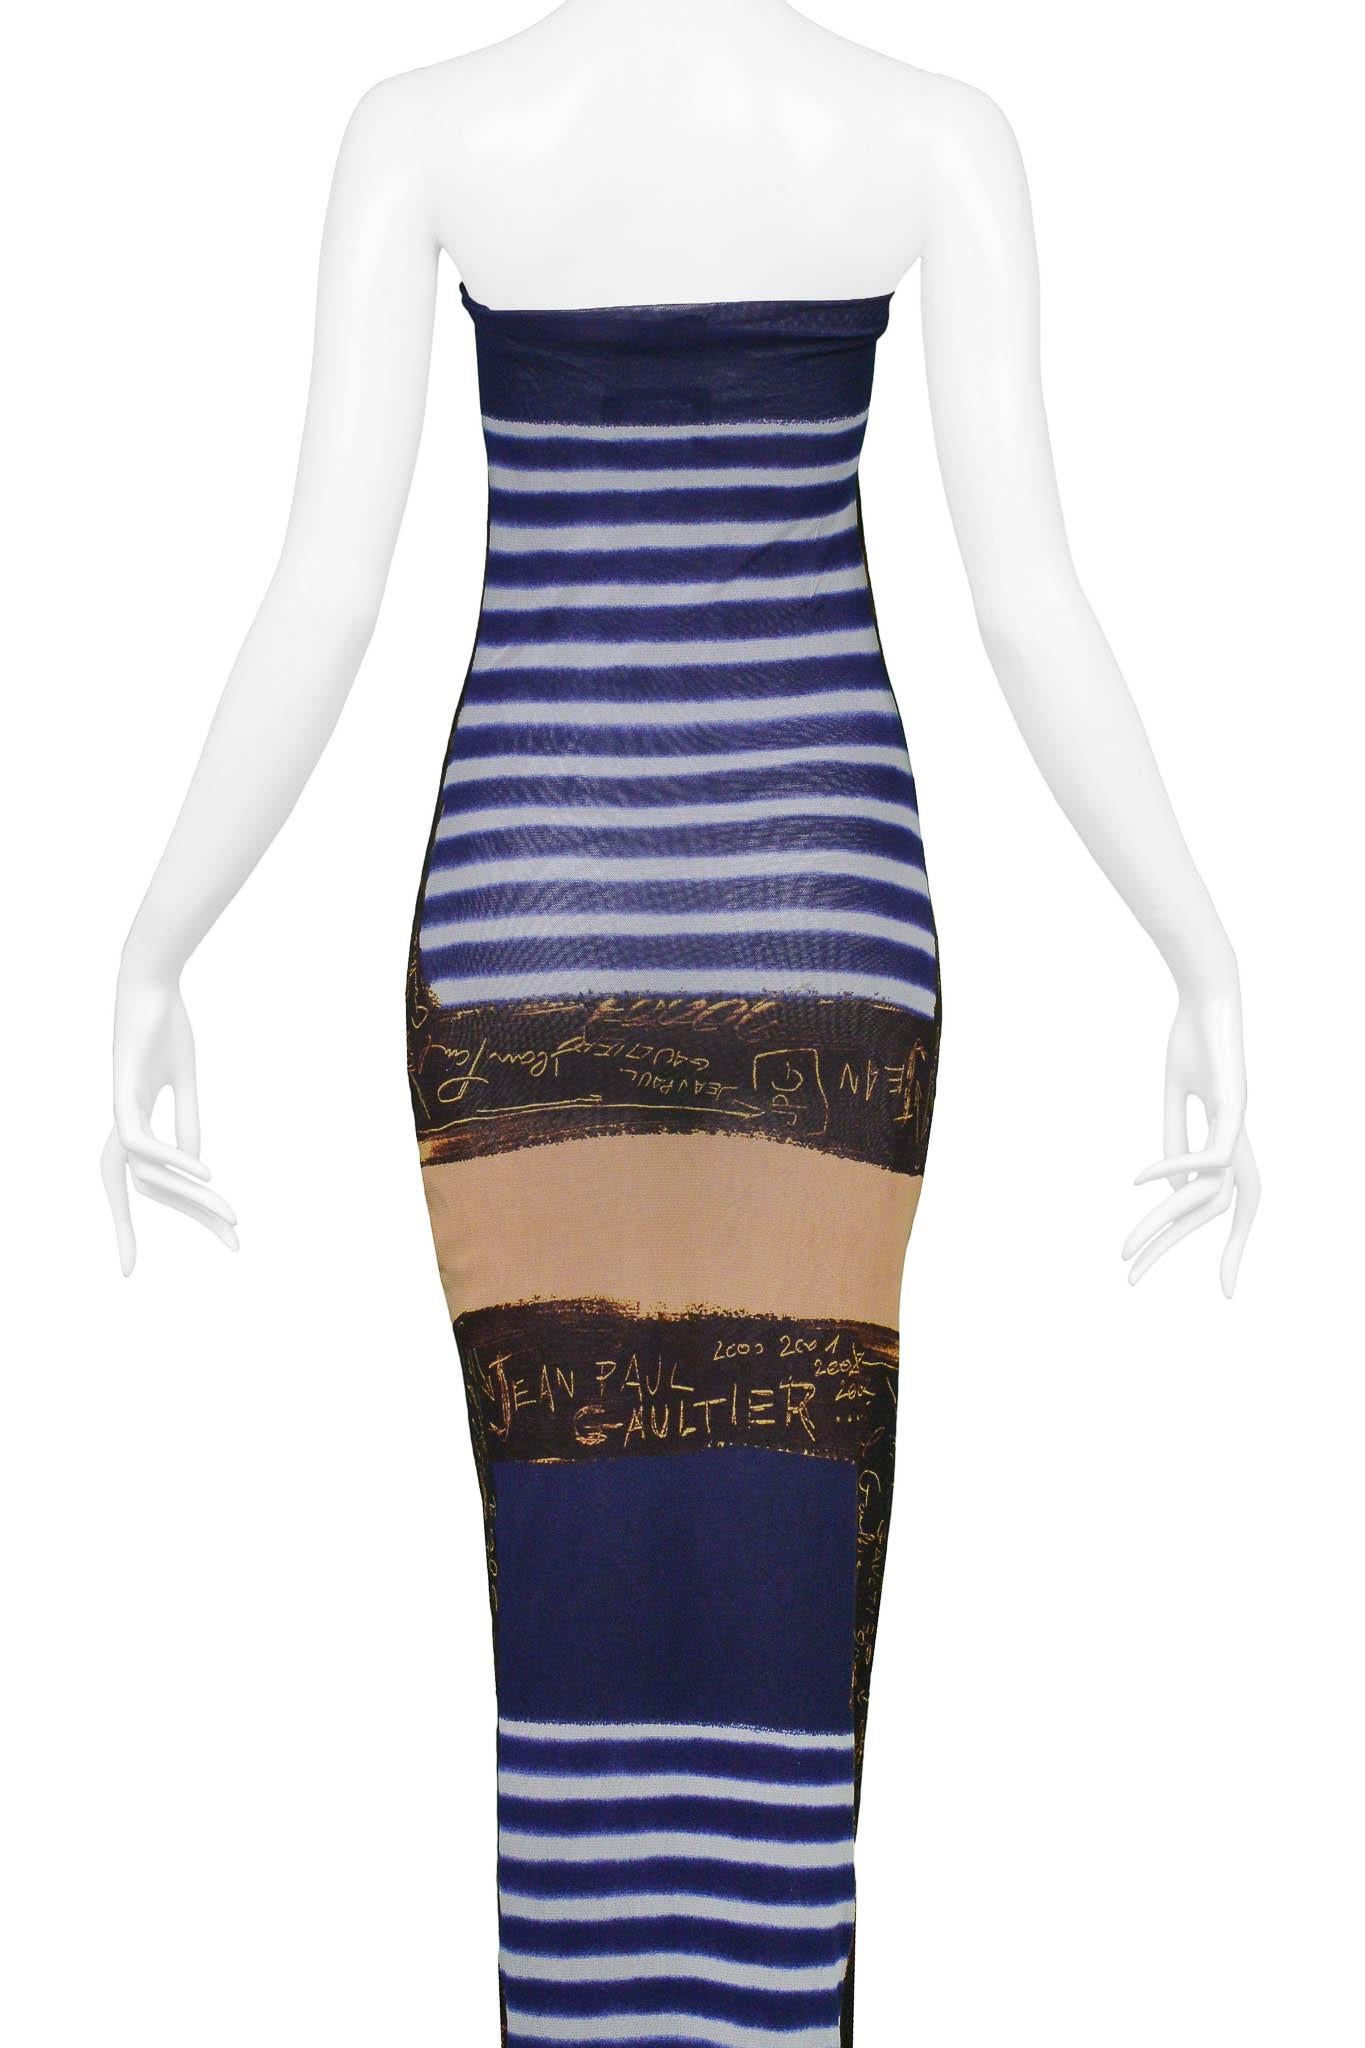 Jean Paul Gaultier French Nautical Striped Mesh Dress With Signature Print 2001 4